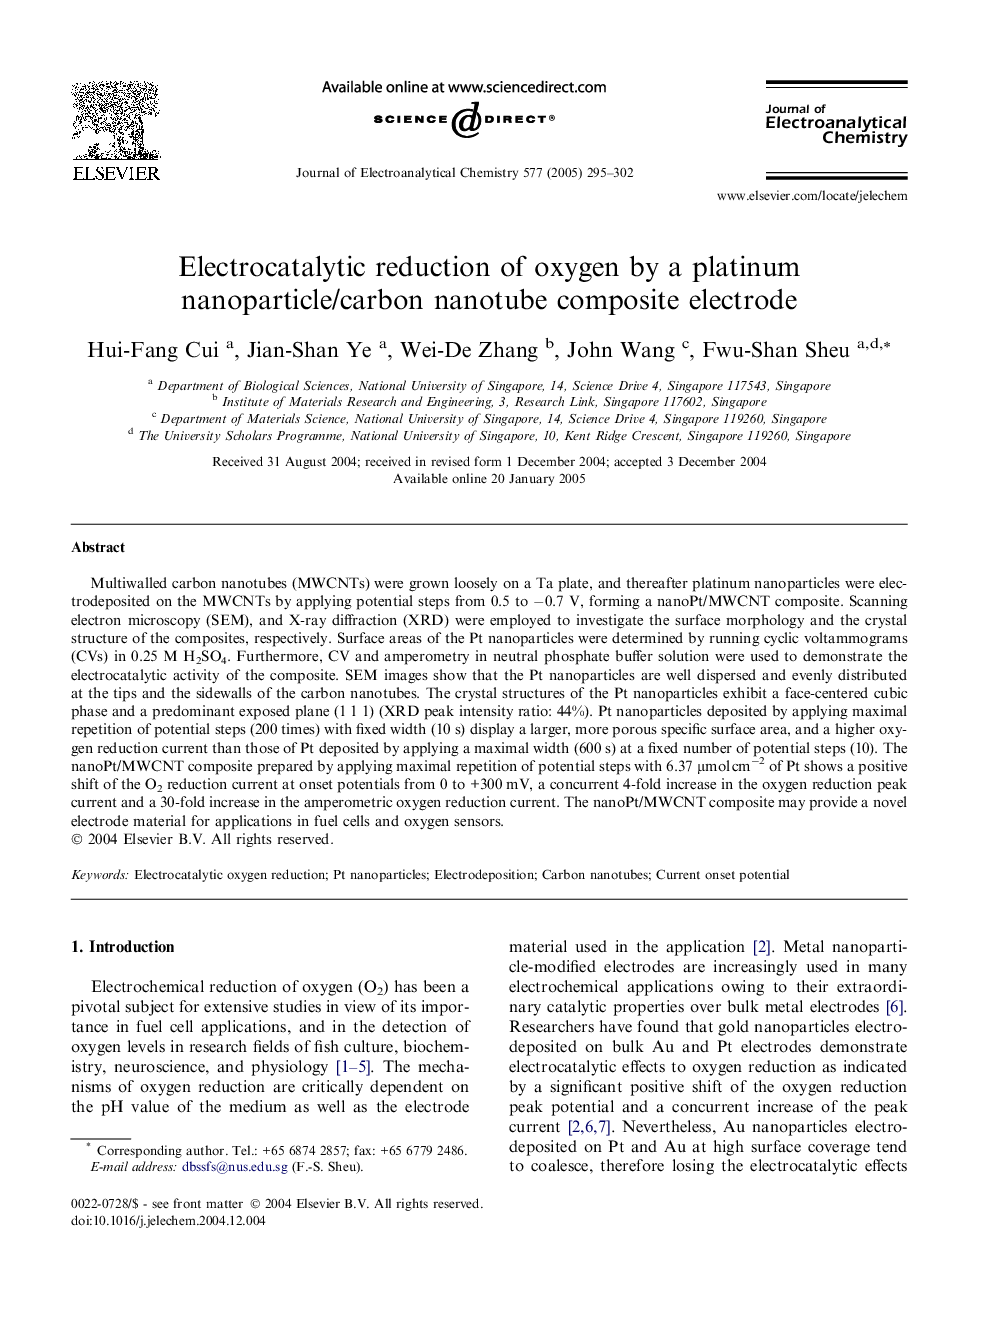 Electrocatalytic reduction of oxygen by a platinum nanoparticle/carbon nanotube composite electrode